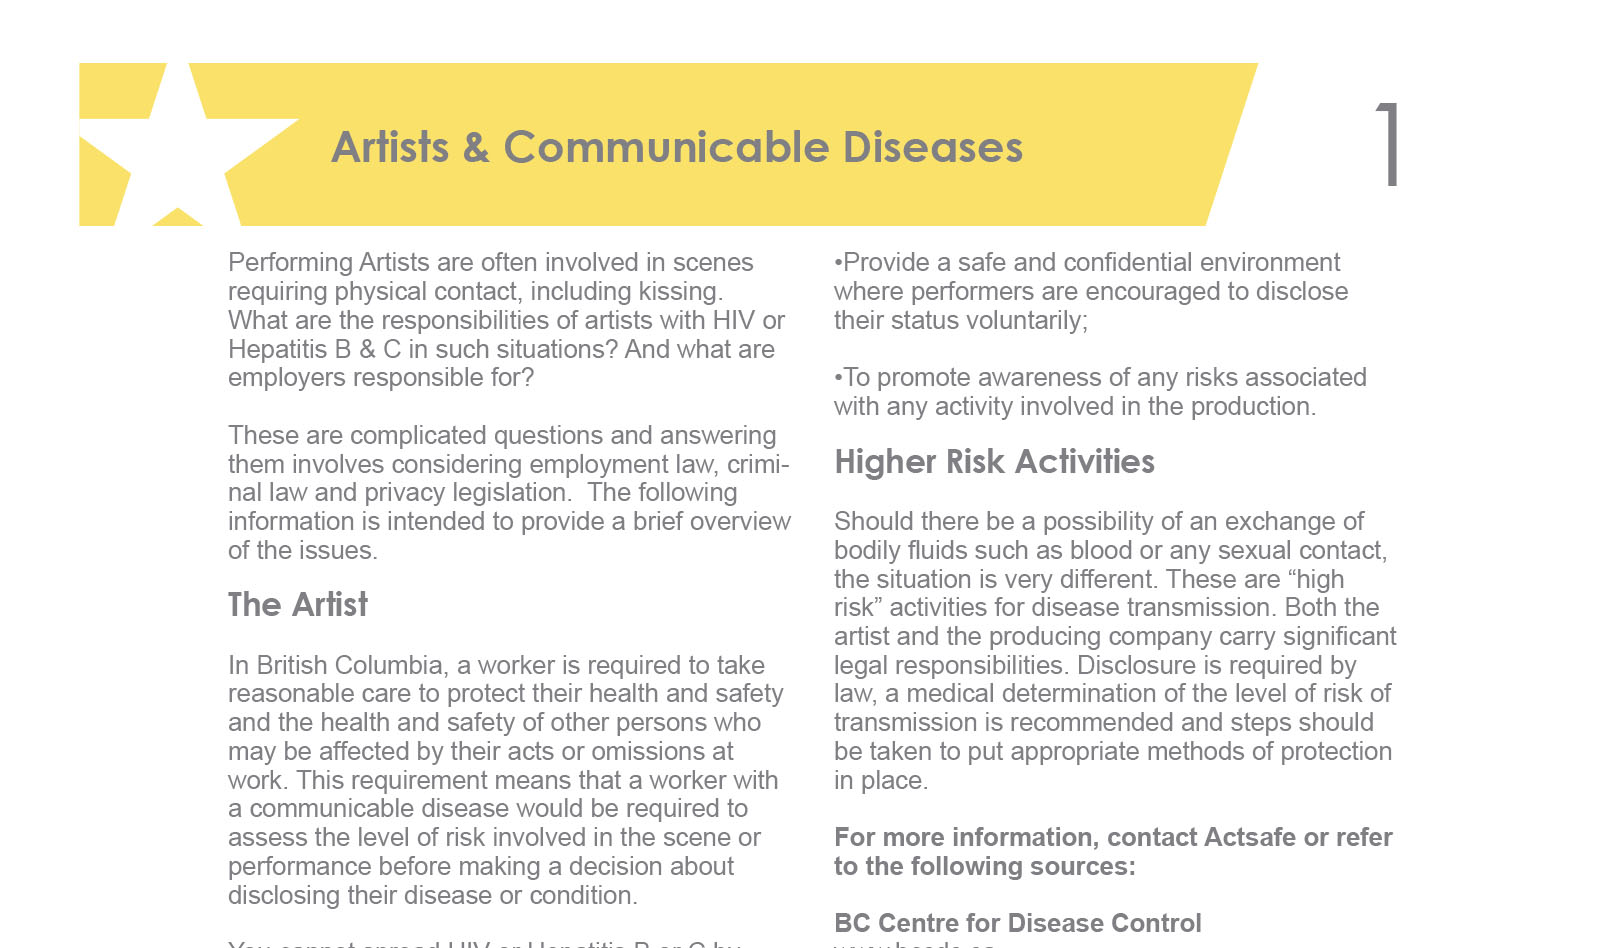 Artists and Communicable Diseases Booklet